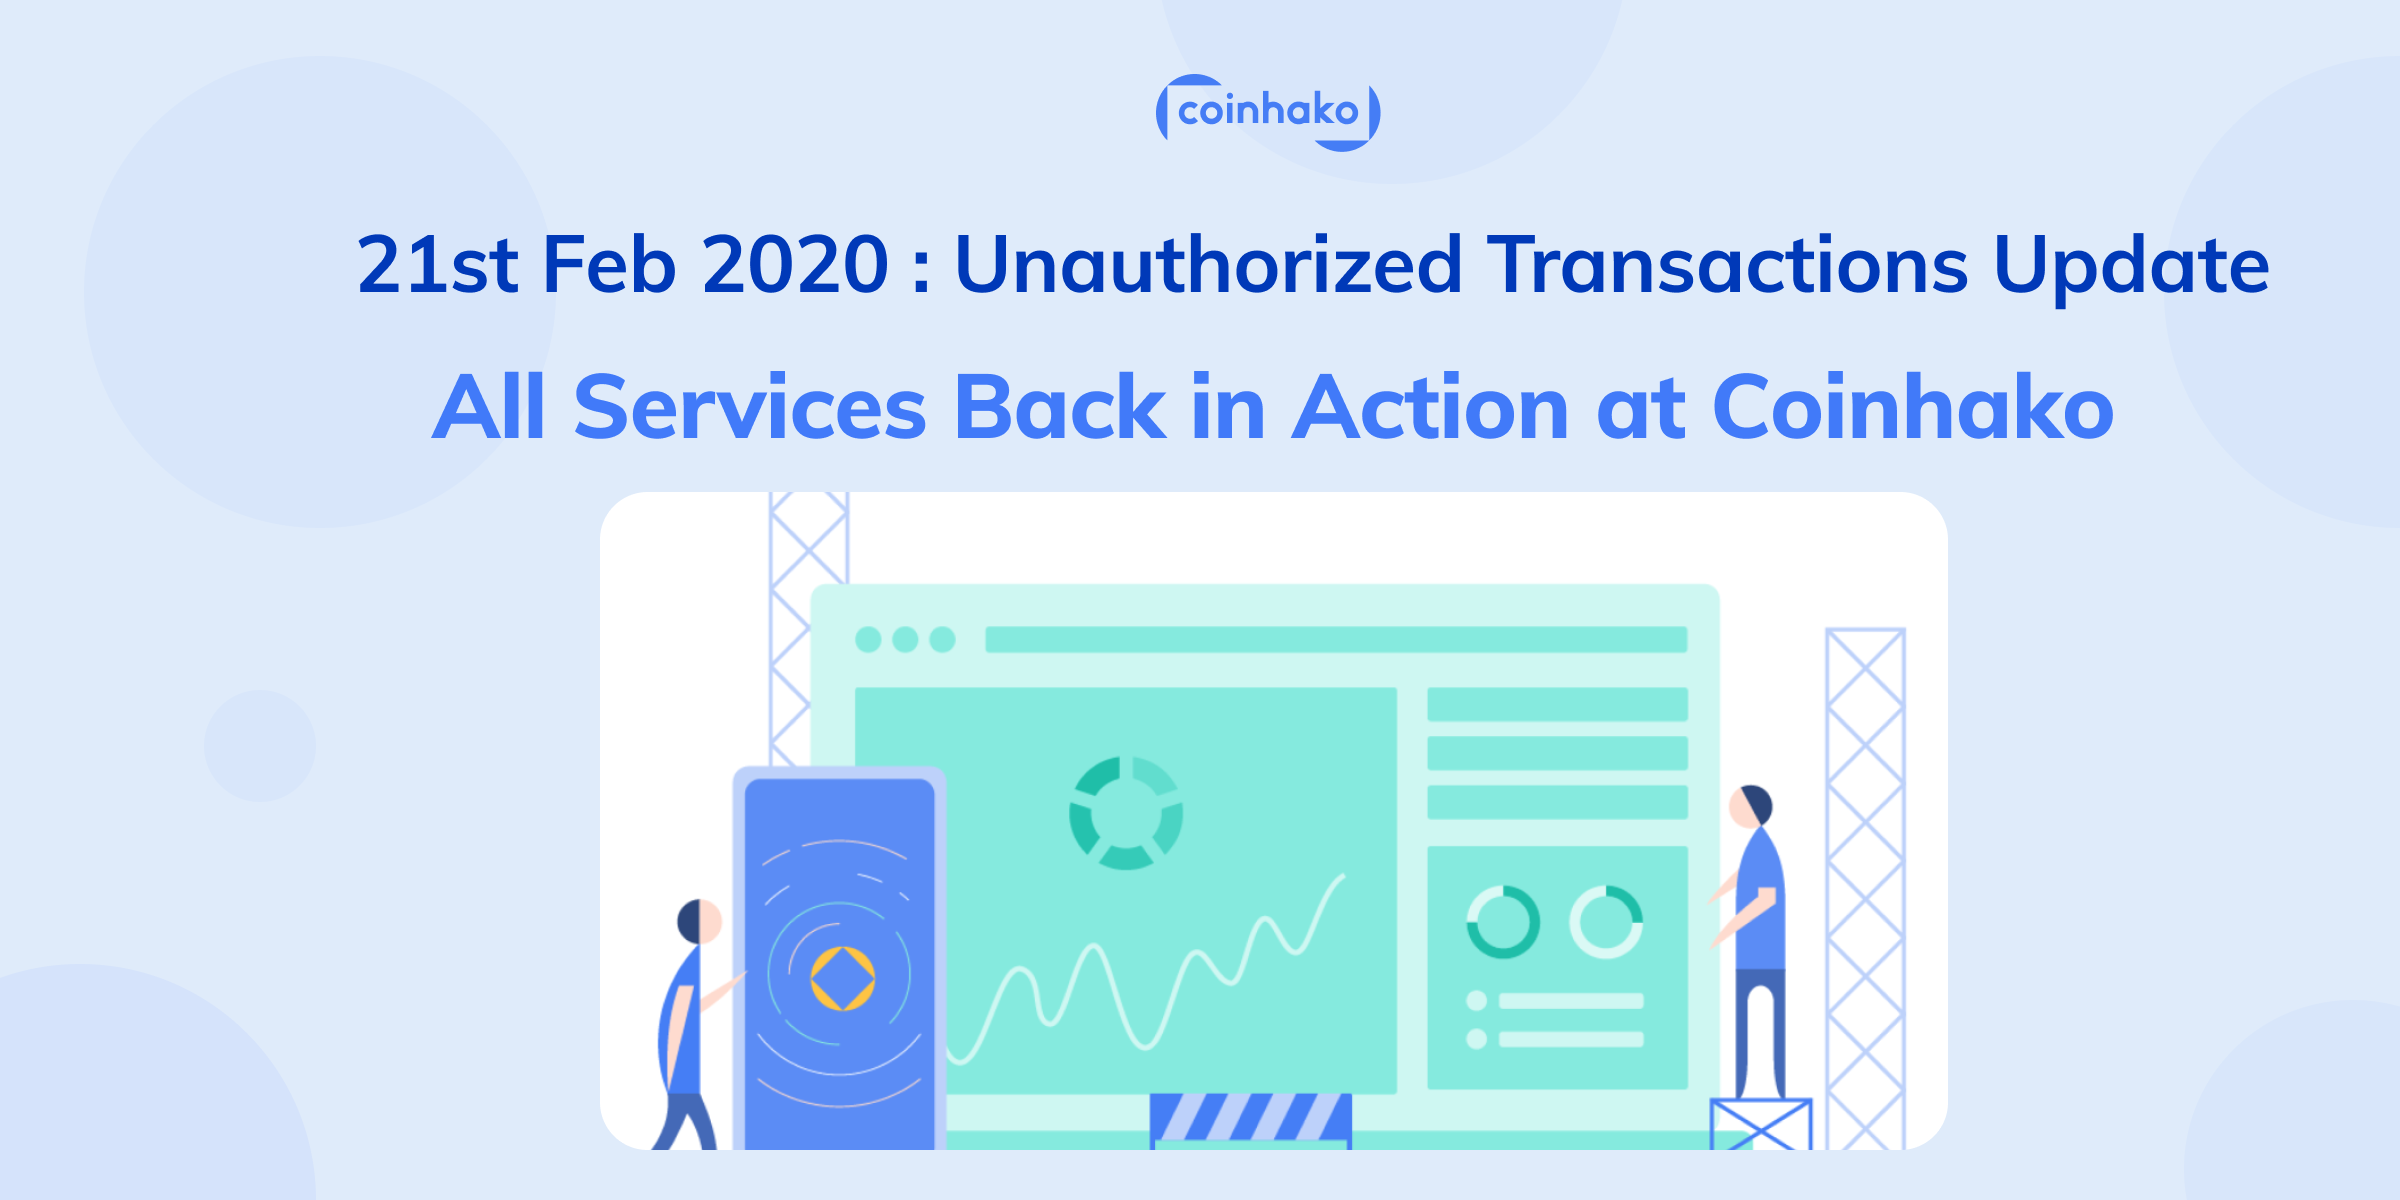 21st Feb 20 Unauthorized Transactions Update: All Funds Safe, Restored and Services Reinstated - All Services Back in Action at Coinhako